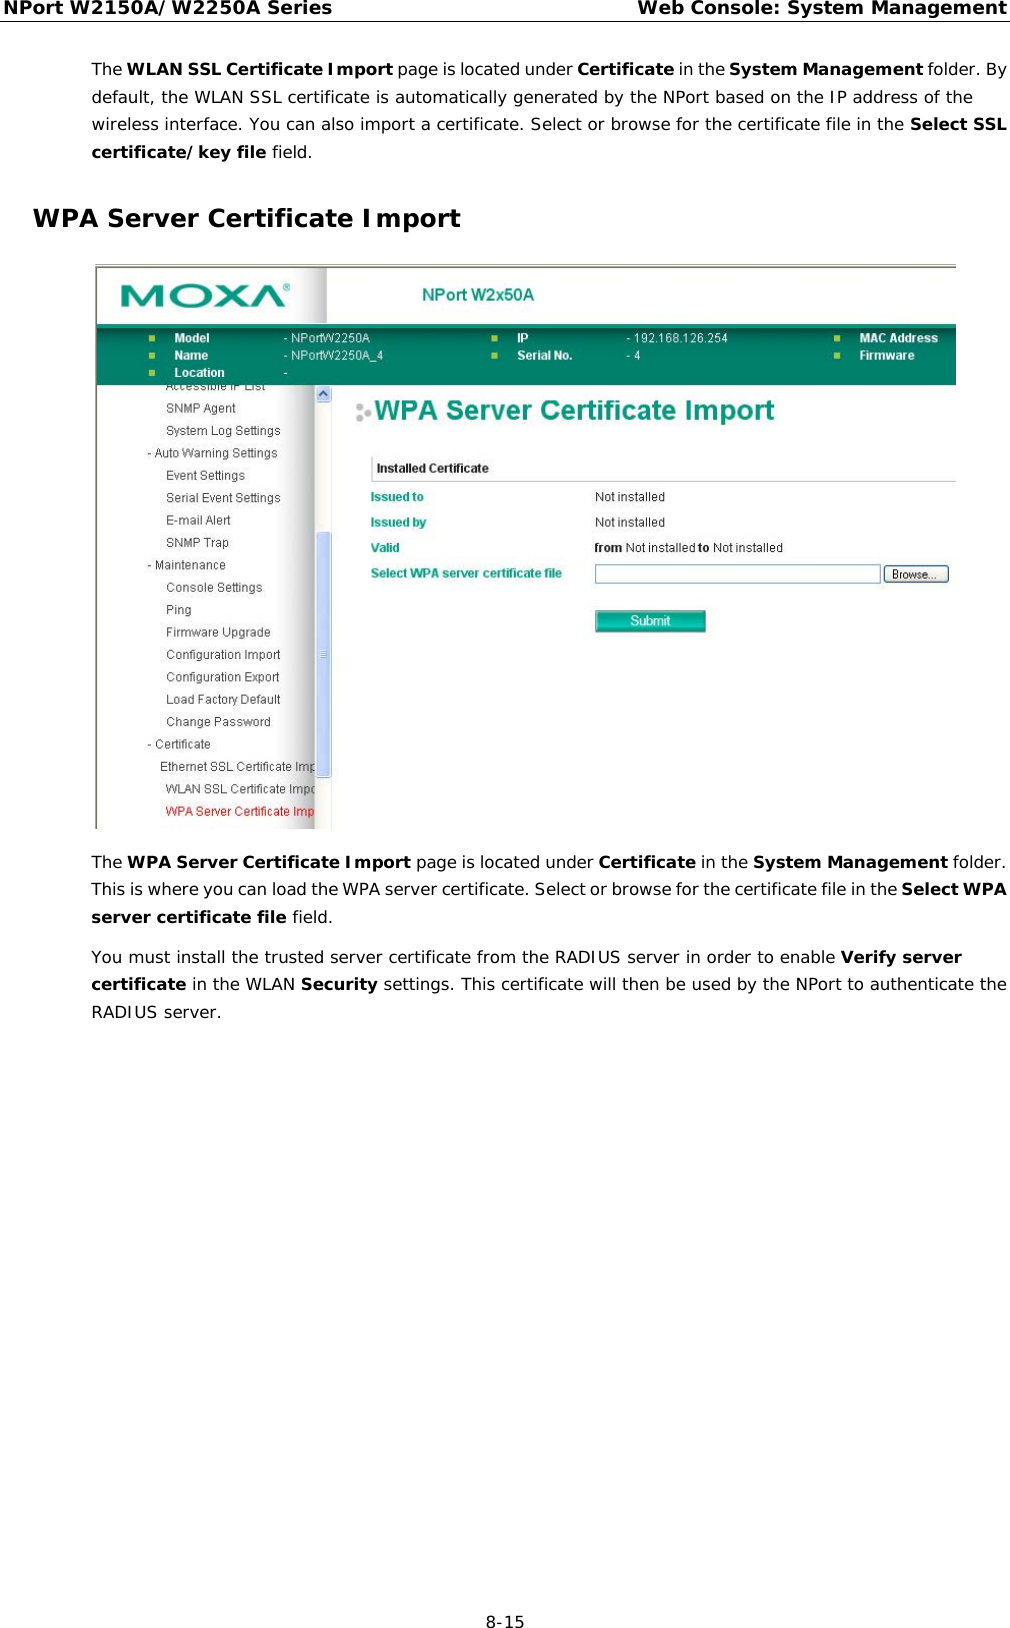 NPort W2150A/W2250A Series Web Console: System Management  8-15 The WLAN SSL Certificate Import page is located under Certificate in the System Management folder. By default, the WLAN SSL certificate is automatically generated by the NPort based on the IP address of the wireless interface. You can also import a certificate. Select or browse for the certificate file in the Select SSL certificate/key file field. WPA Server Certificate Import  The WPA Server Certificate Import page is located under Certificate in the System Management folder. This is where you can load the WPA server certificate. Select or browse for the certificate file in the Select WPA server certificate file field. You must install the trusted server certificate from the RADIUS server in order to enable Verify server certificate in the WLAN Security settings. This certificate will then be used by the NPort to authenticate the RADIUS server. 